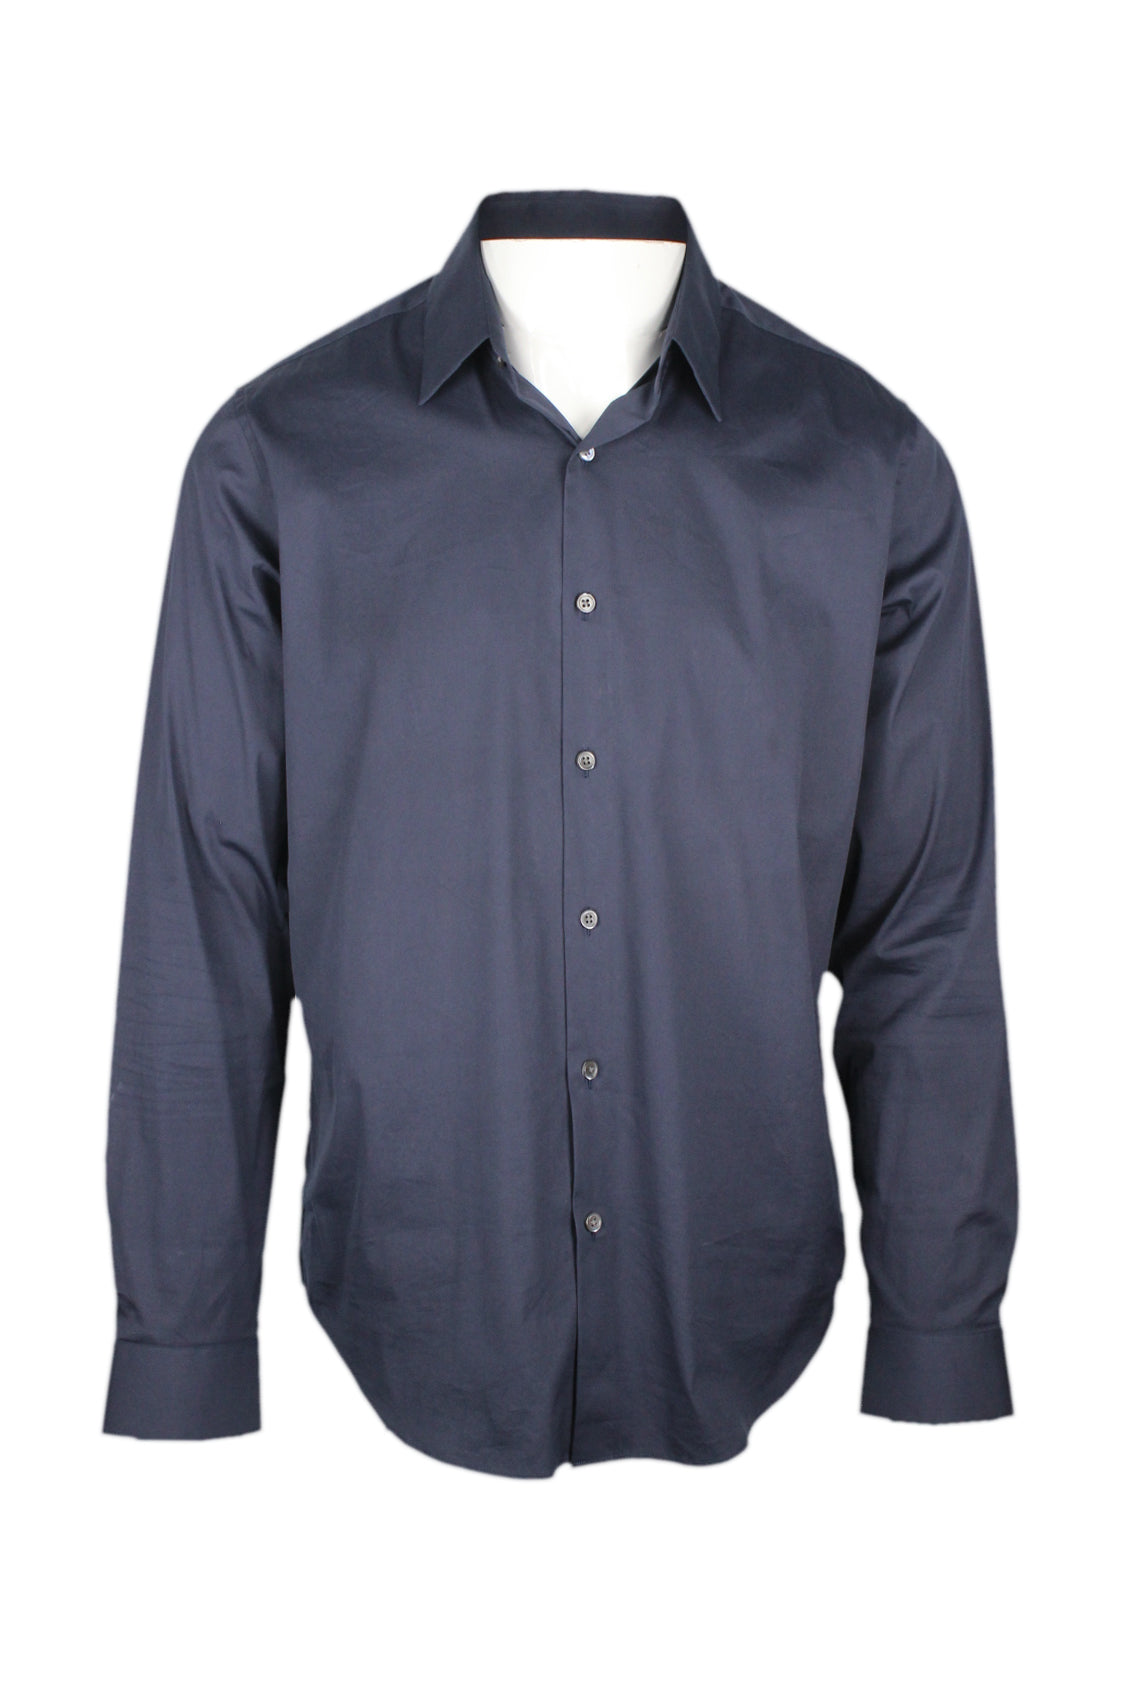 front view of theory midnight long sleeve button up shirt. features buttons at cuffs and tonal stitching throughout.